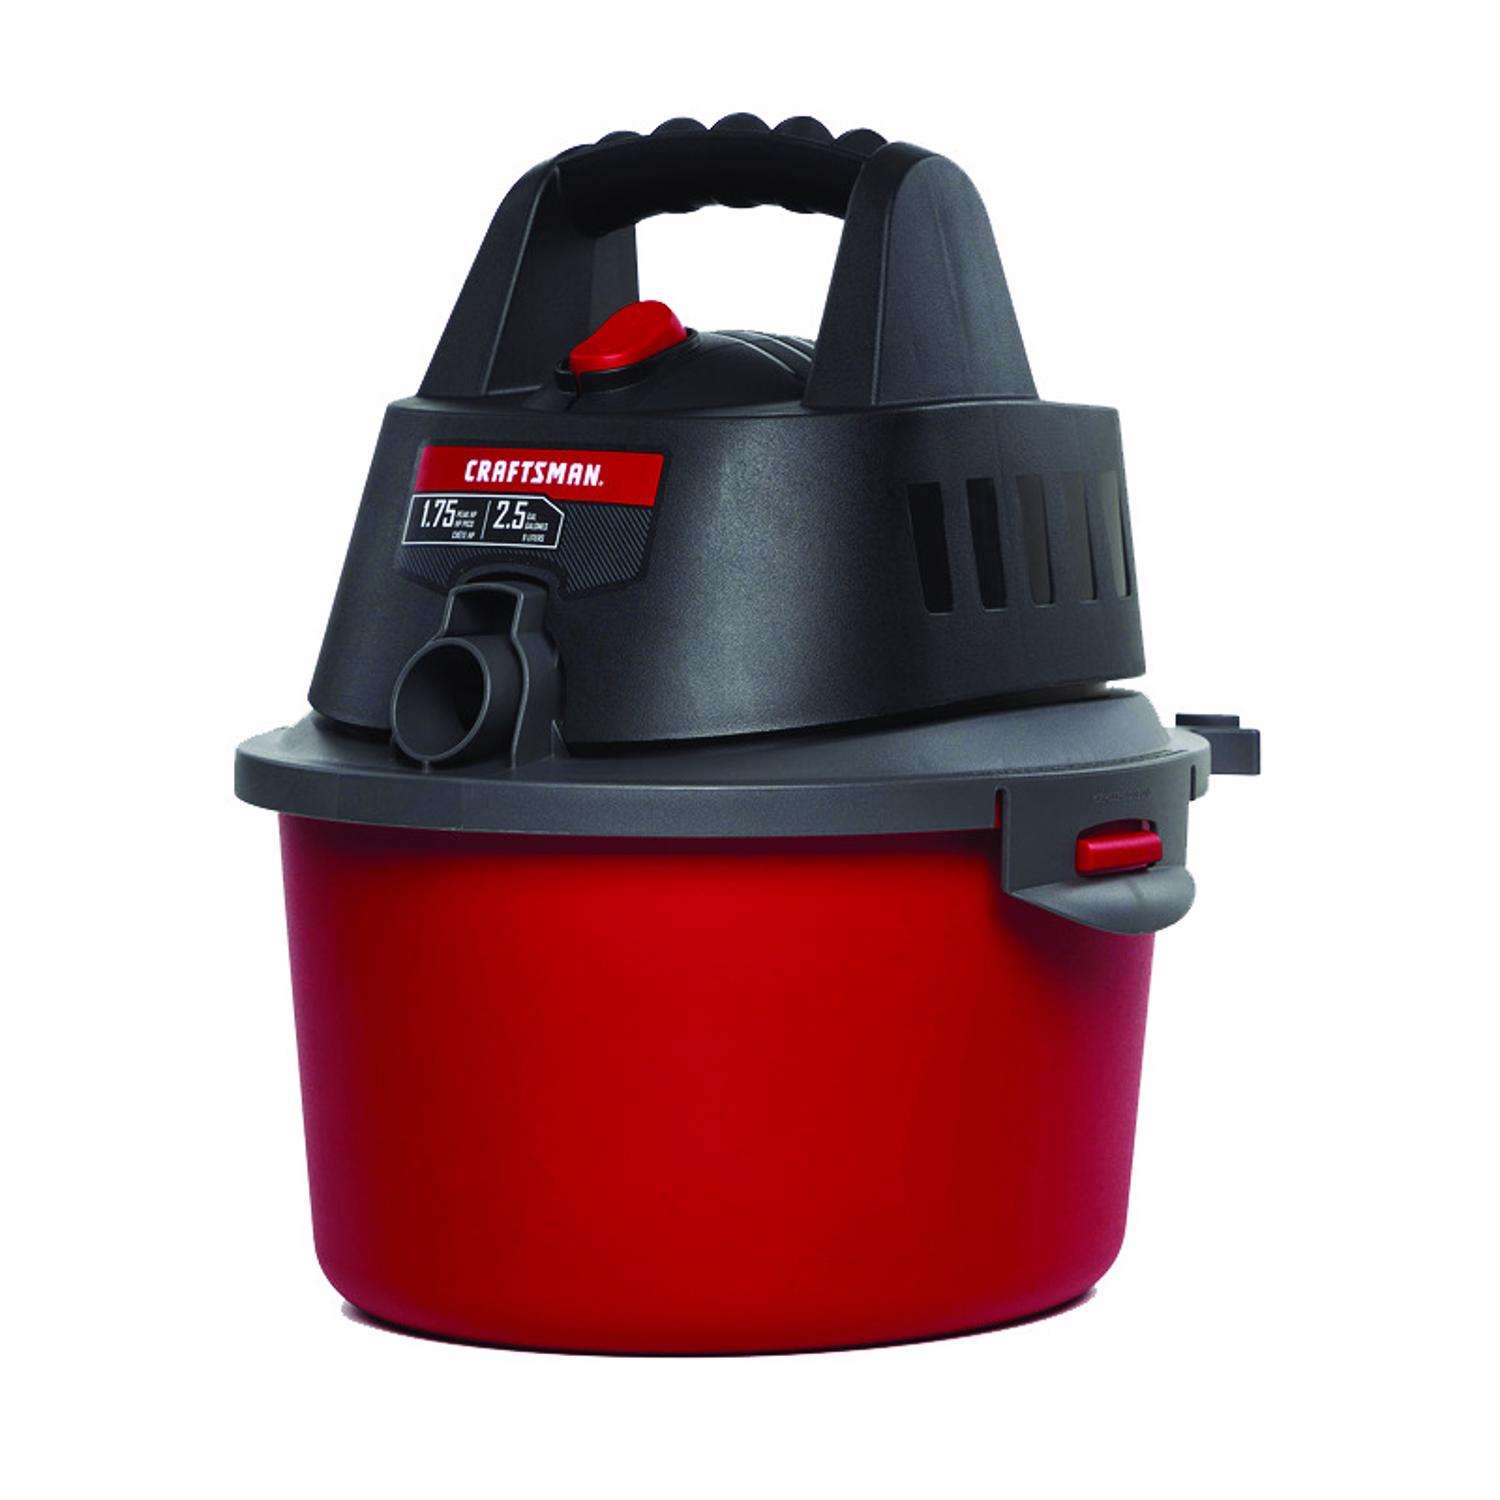 Craftsman 917611 Wet/Dry Vacuum 2.5 gal Corded 1.75 hp 120 volts 